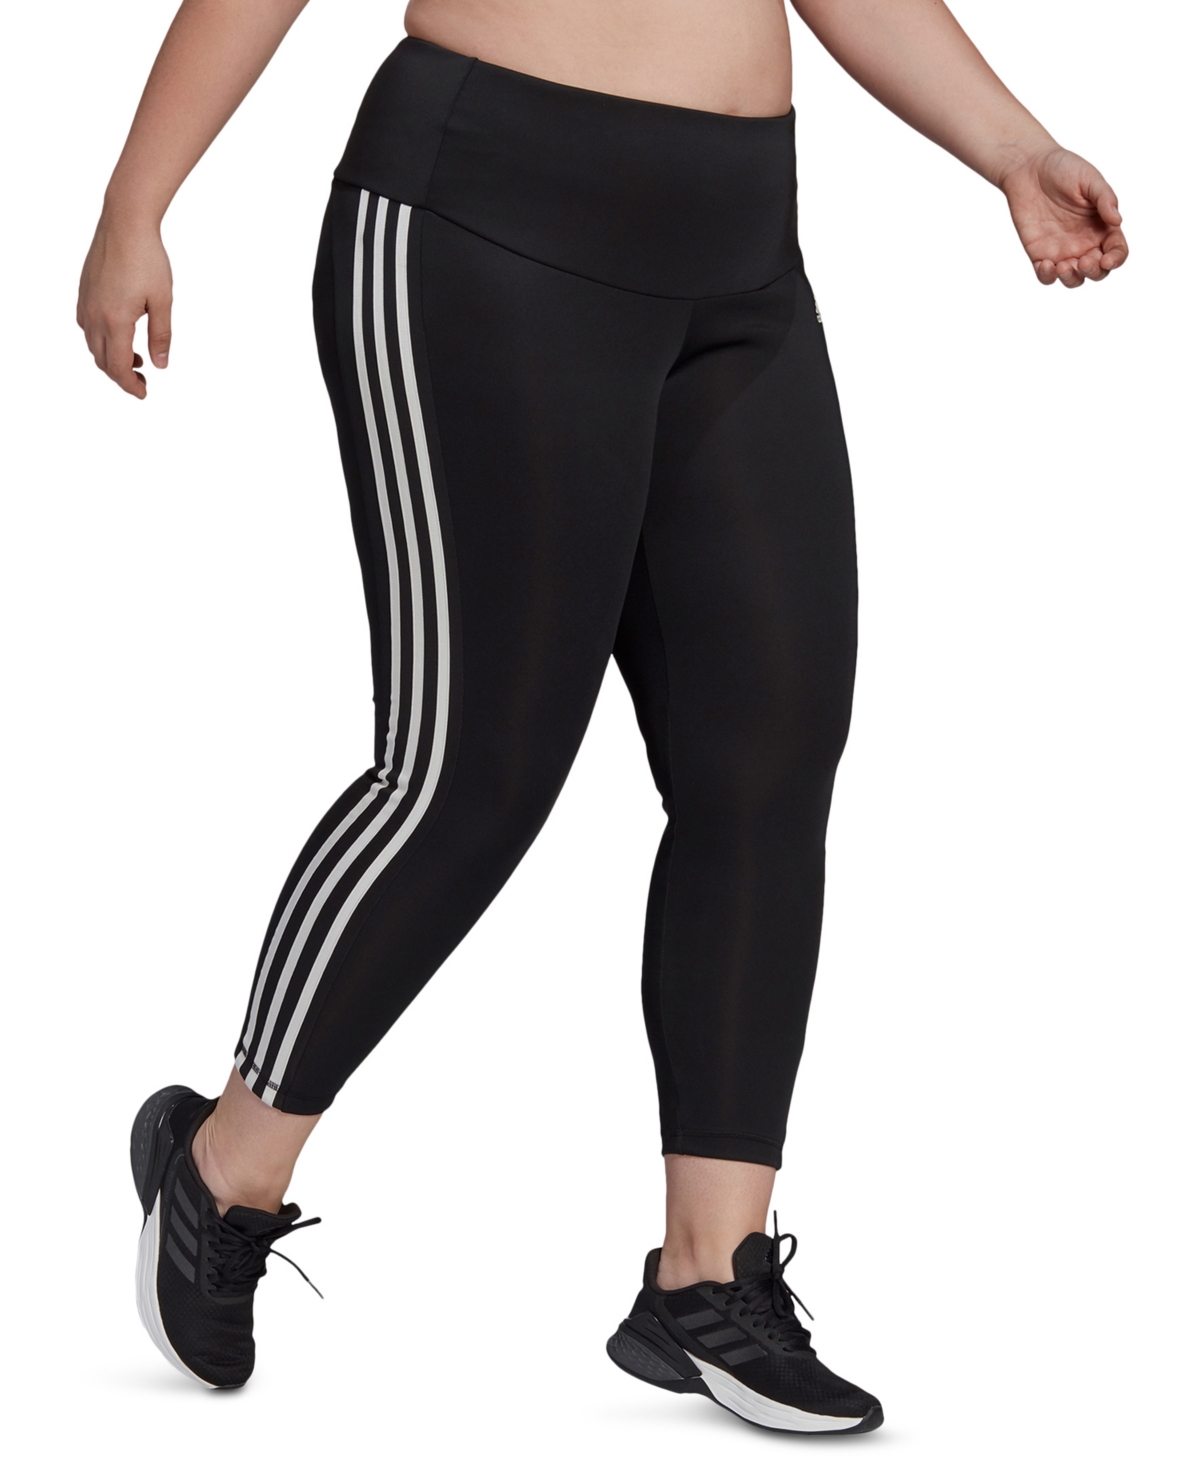  adidas Plus-Size Designed 2 Move High-Rise 3-Stripes 7/8 Sport Tights